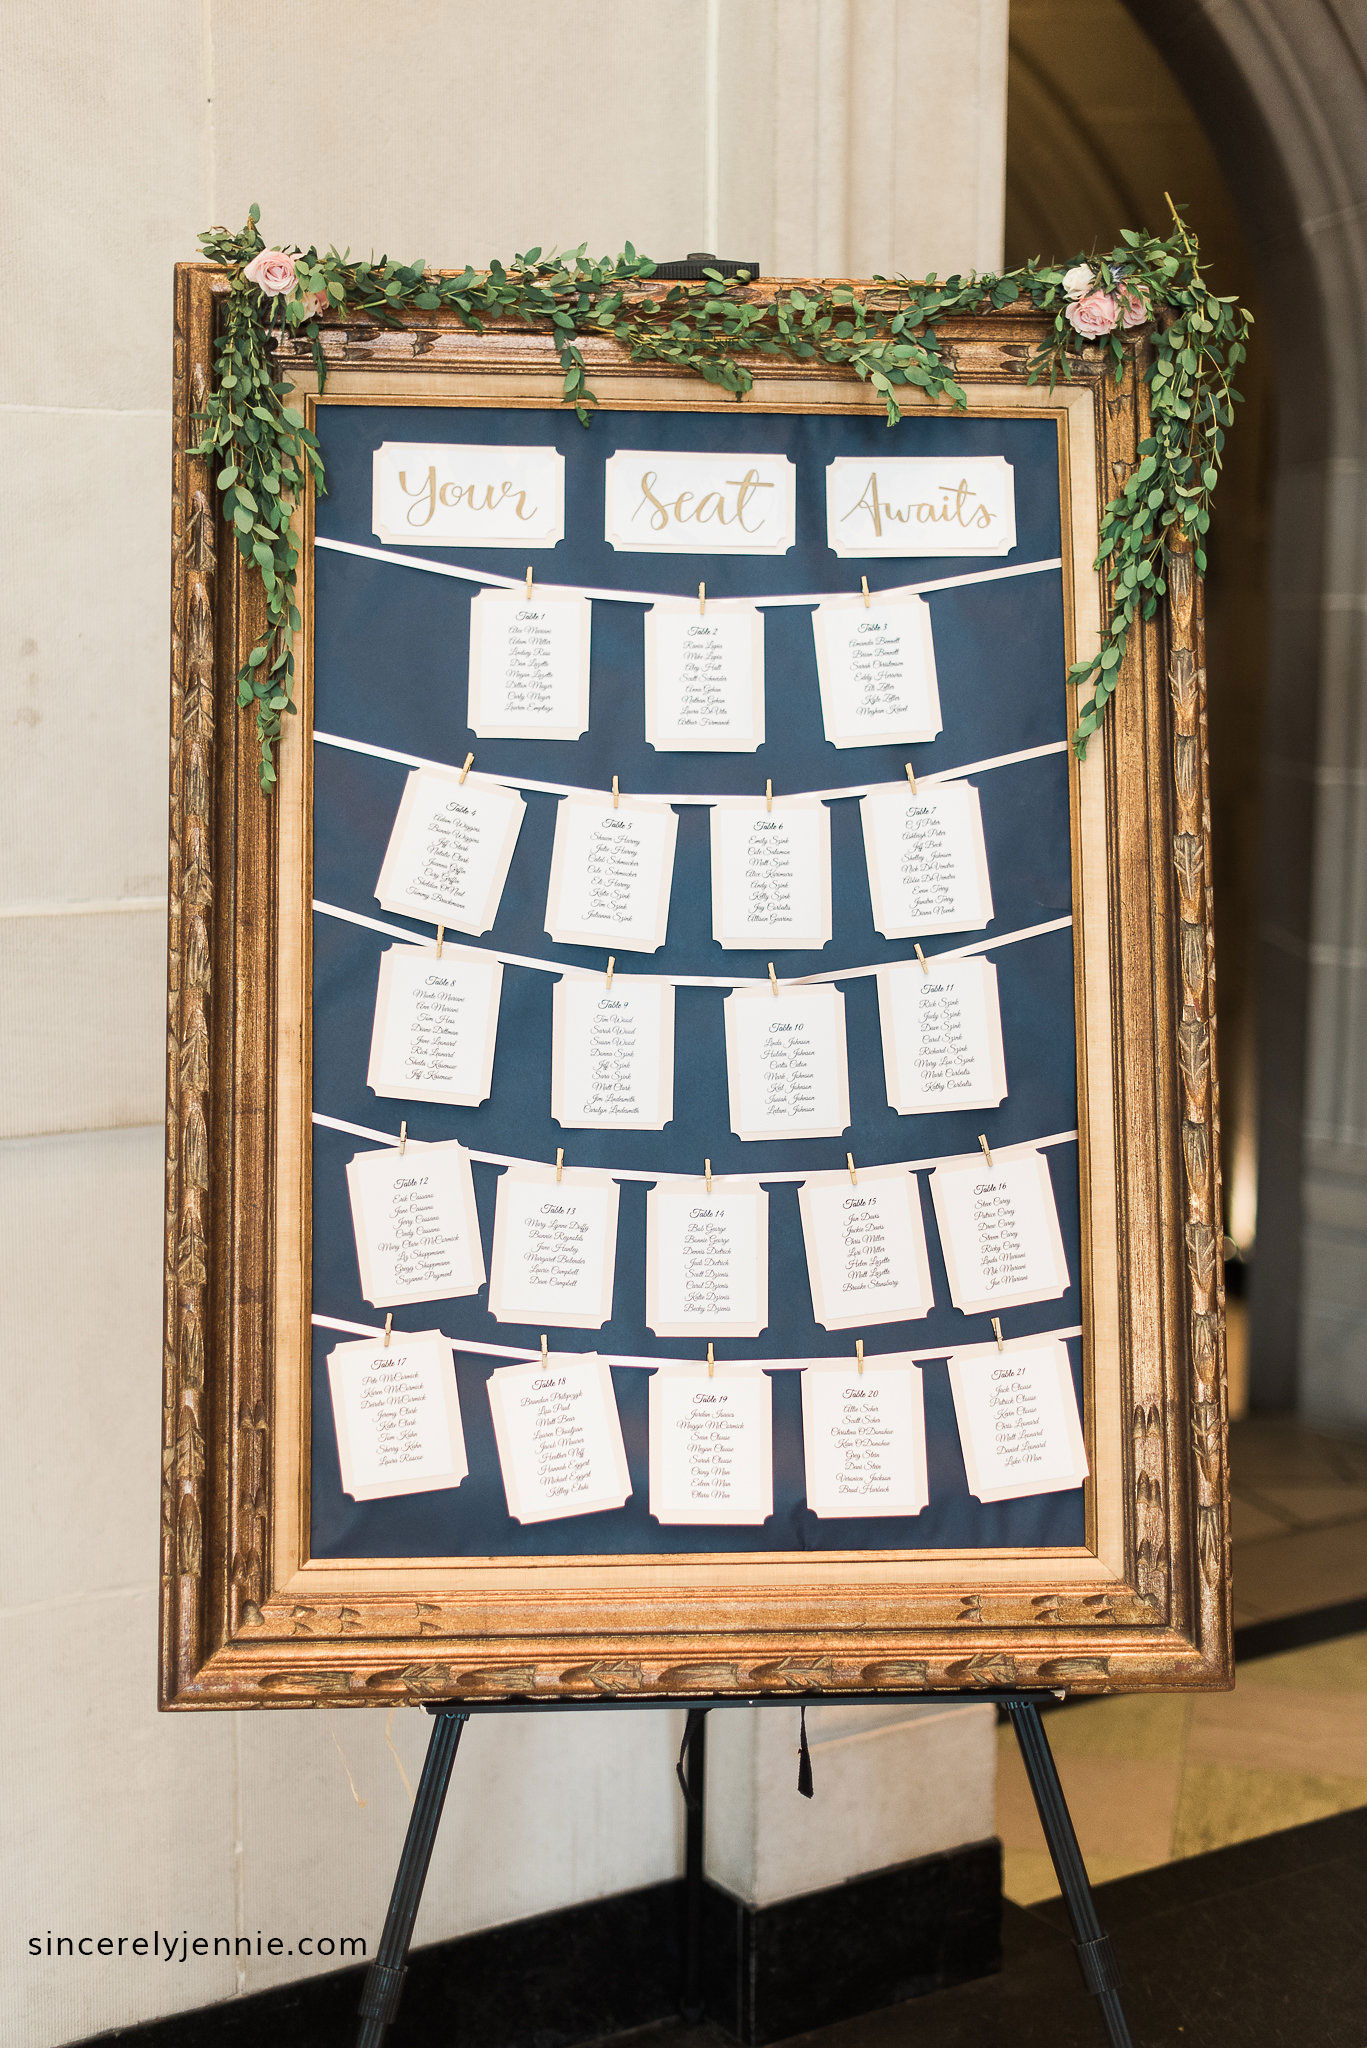 Sincerely, Jennie - DIY Wedding Seating Chart Instructions & Supplies